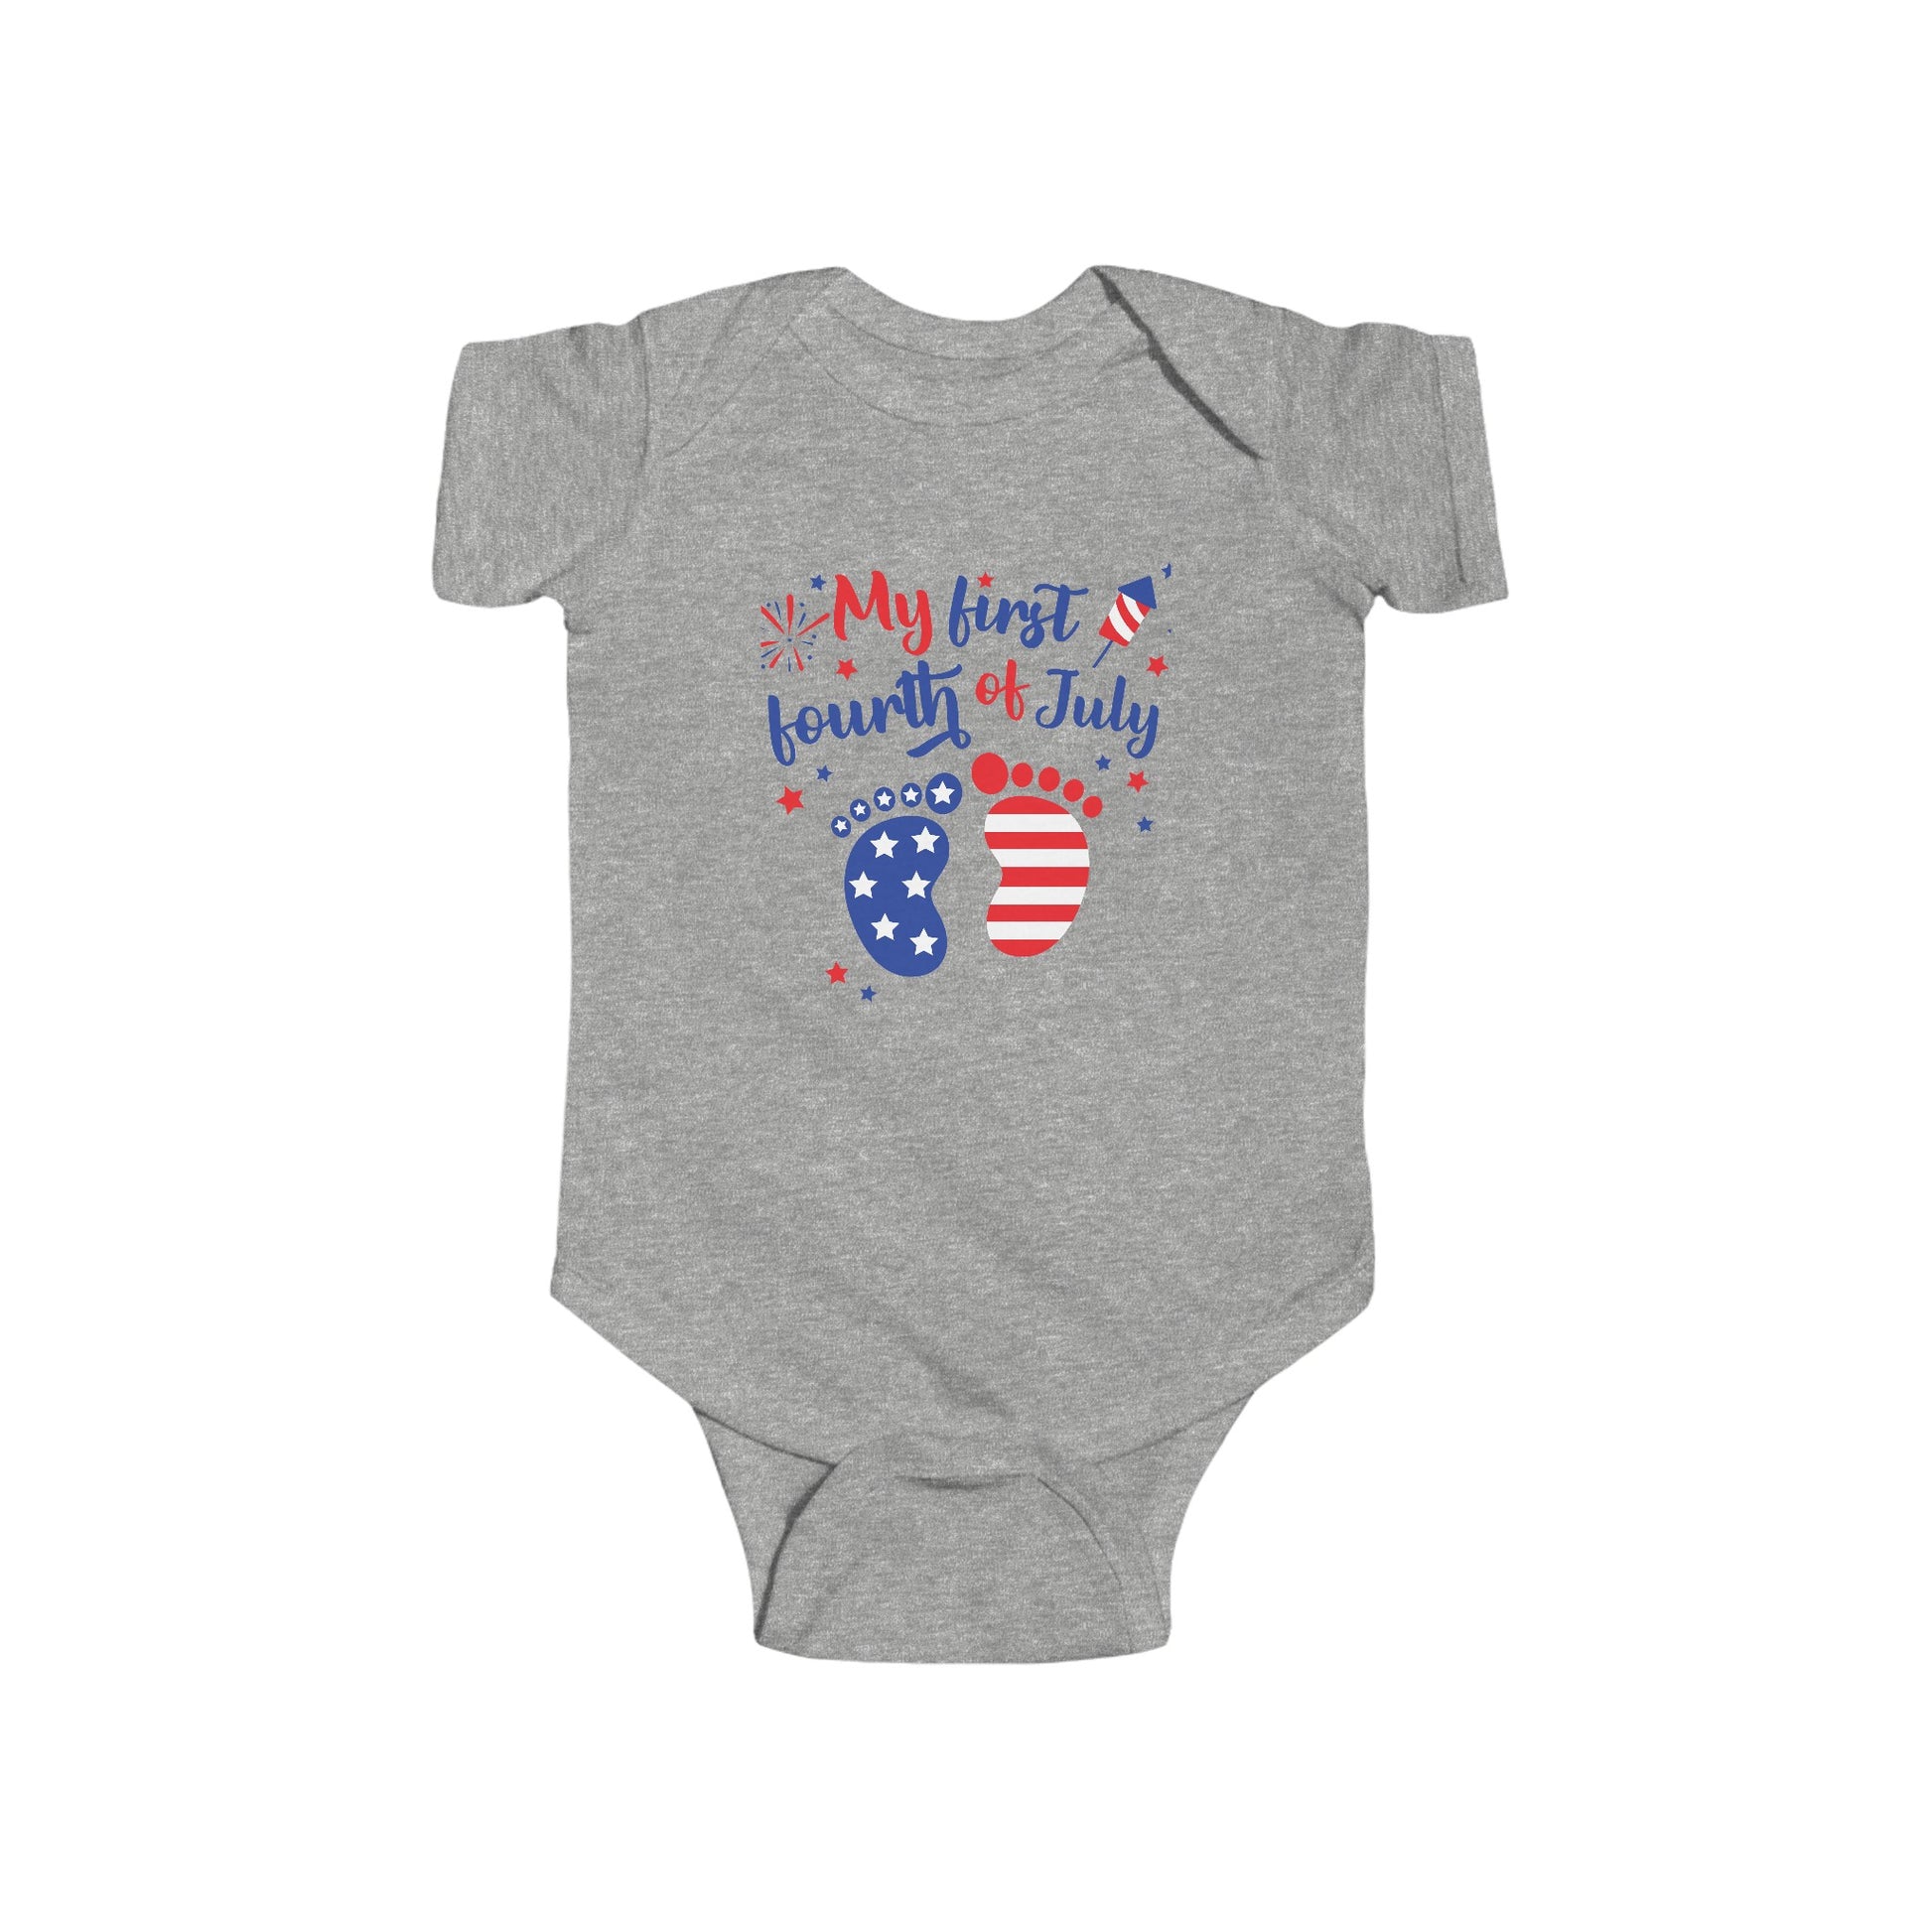 Get trendy with MY First 4th of July Onsie - Kids clothes available at Good Gift Company. Grab yours for $13.50 today!